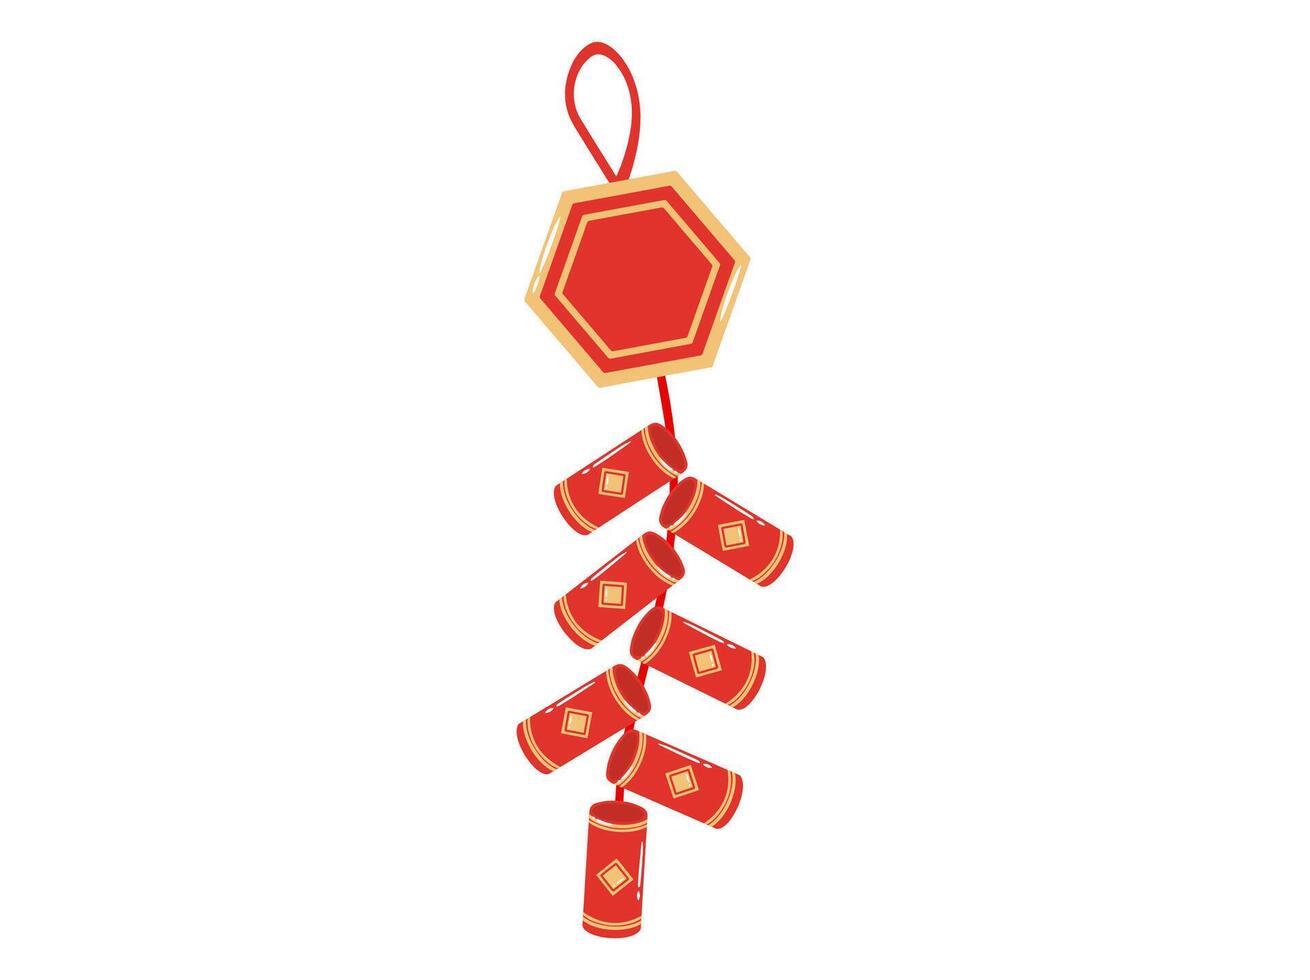 Chinese New Year Firecrackers Illustration vector